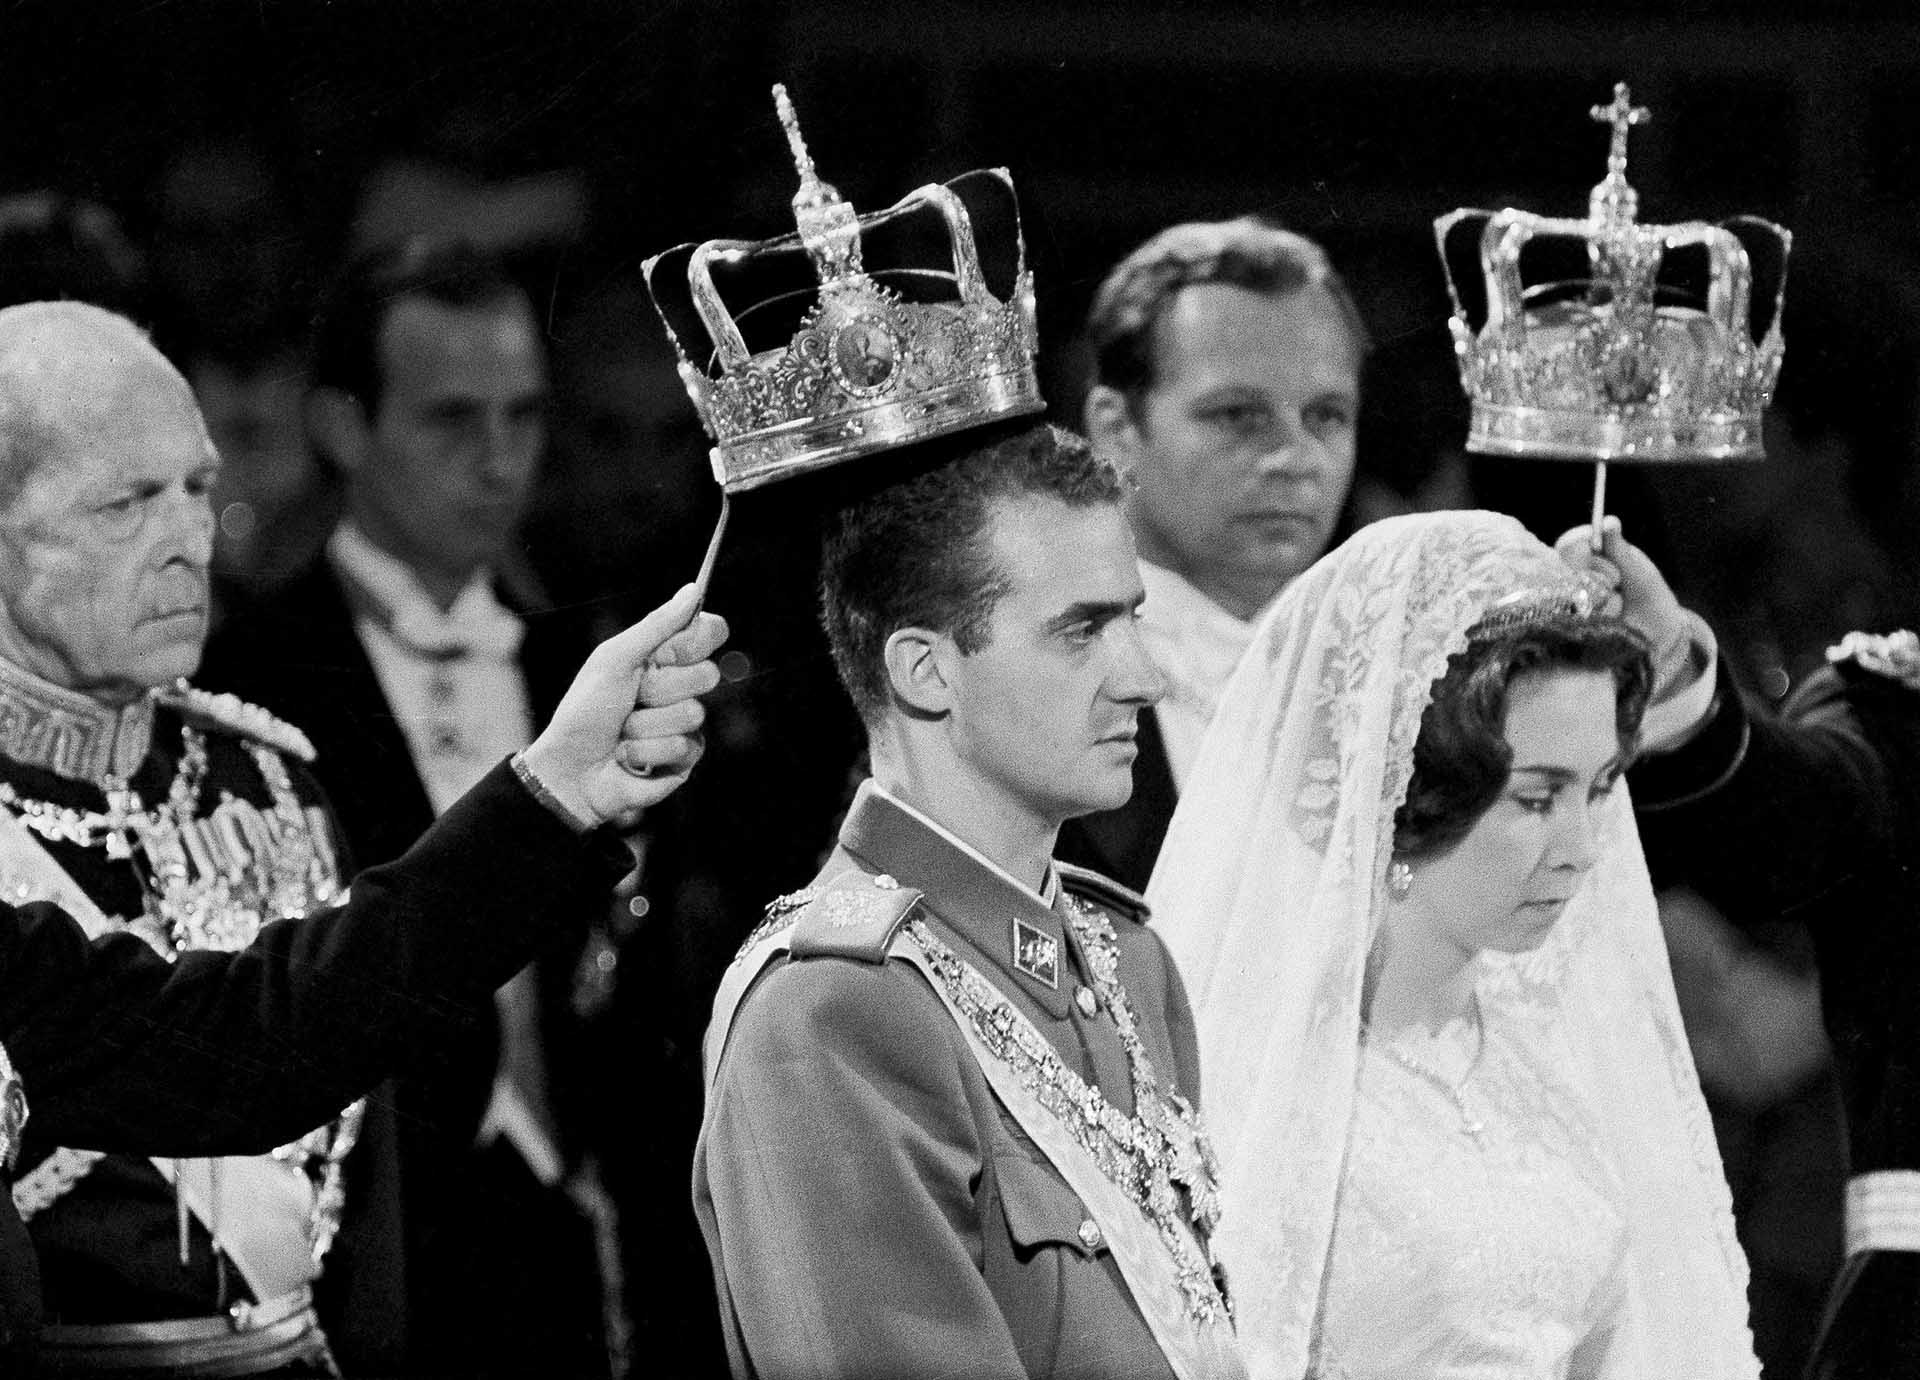 King Paul of Greece stands behind Prince Juan Carlos of Spain and Greek Princess Sophia while crowns are held above their heads during their wedding ceremony in Athens, Greece, May 14, 1962. The crowning took place during the Greek Orthodox ceremony at the Greek Orthodox Cathedral.  (AP Photo/Pool)